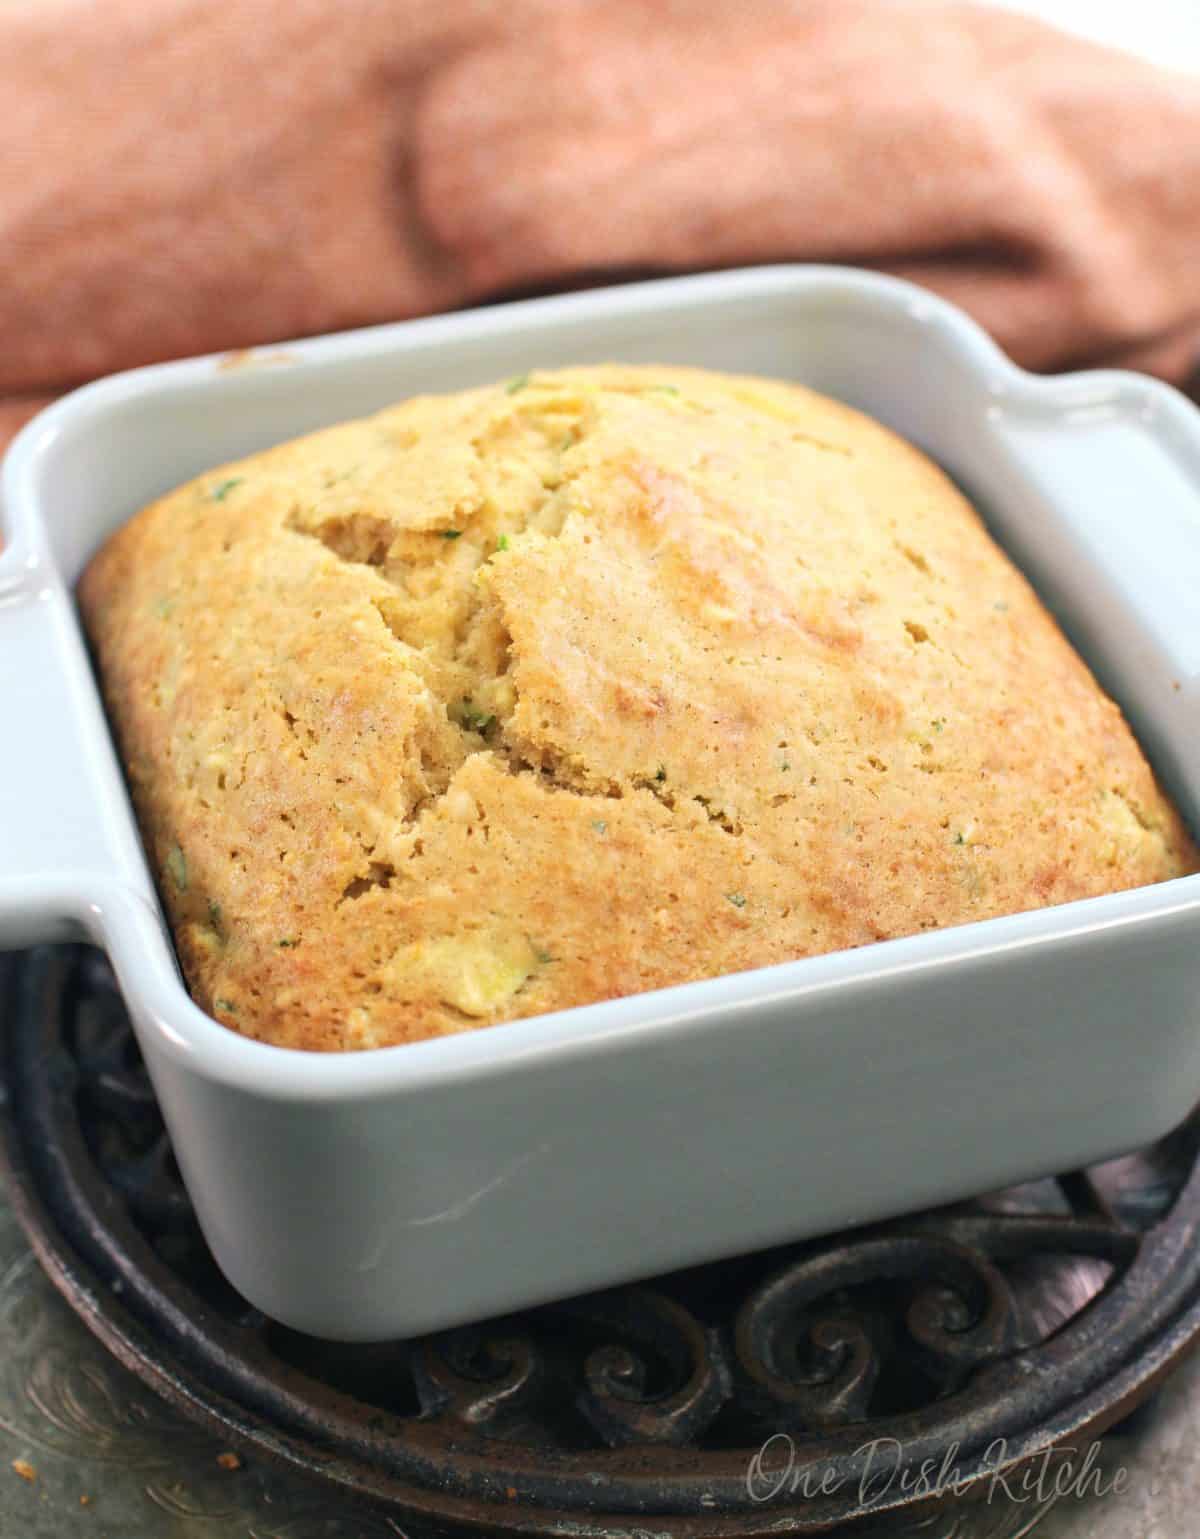 a small loaf of zucchini bread in square baking dish next to an orange napkin.